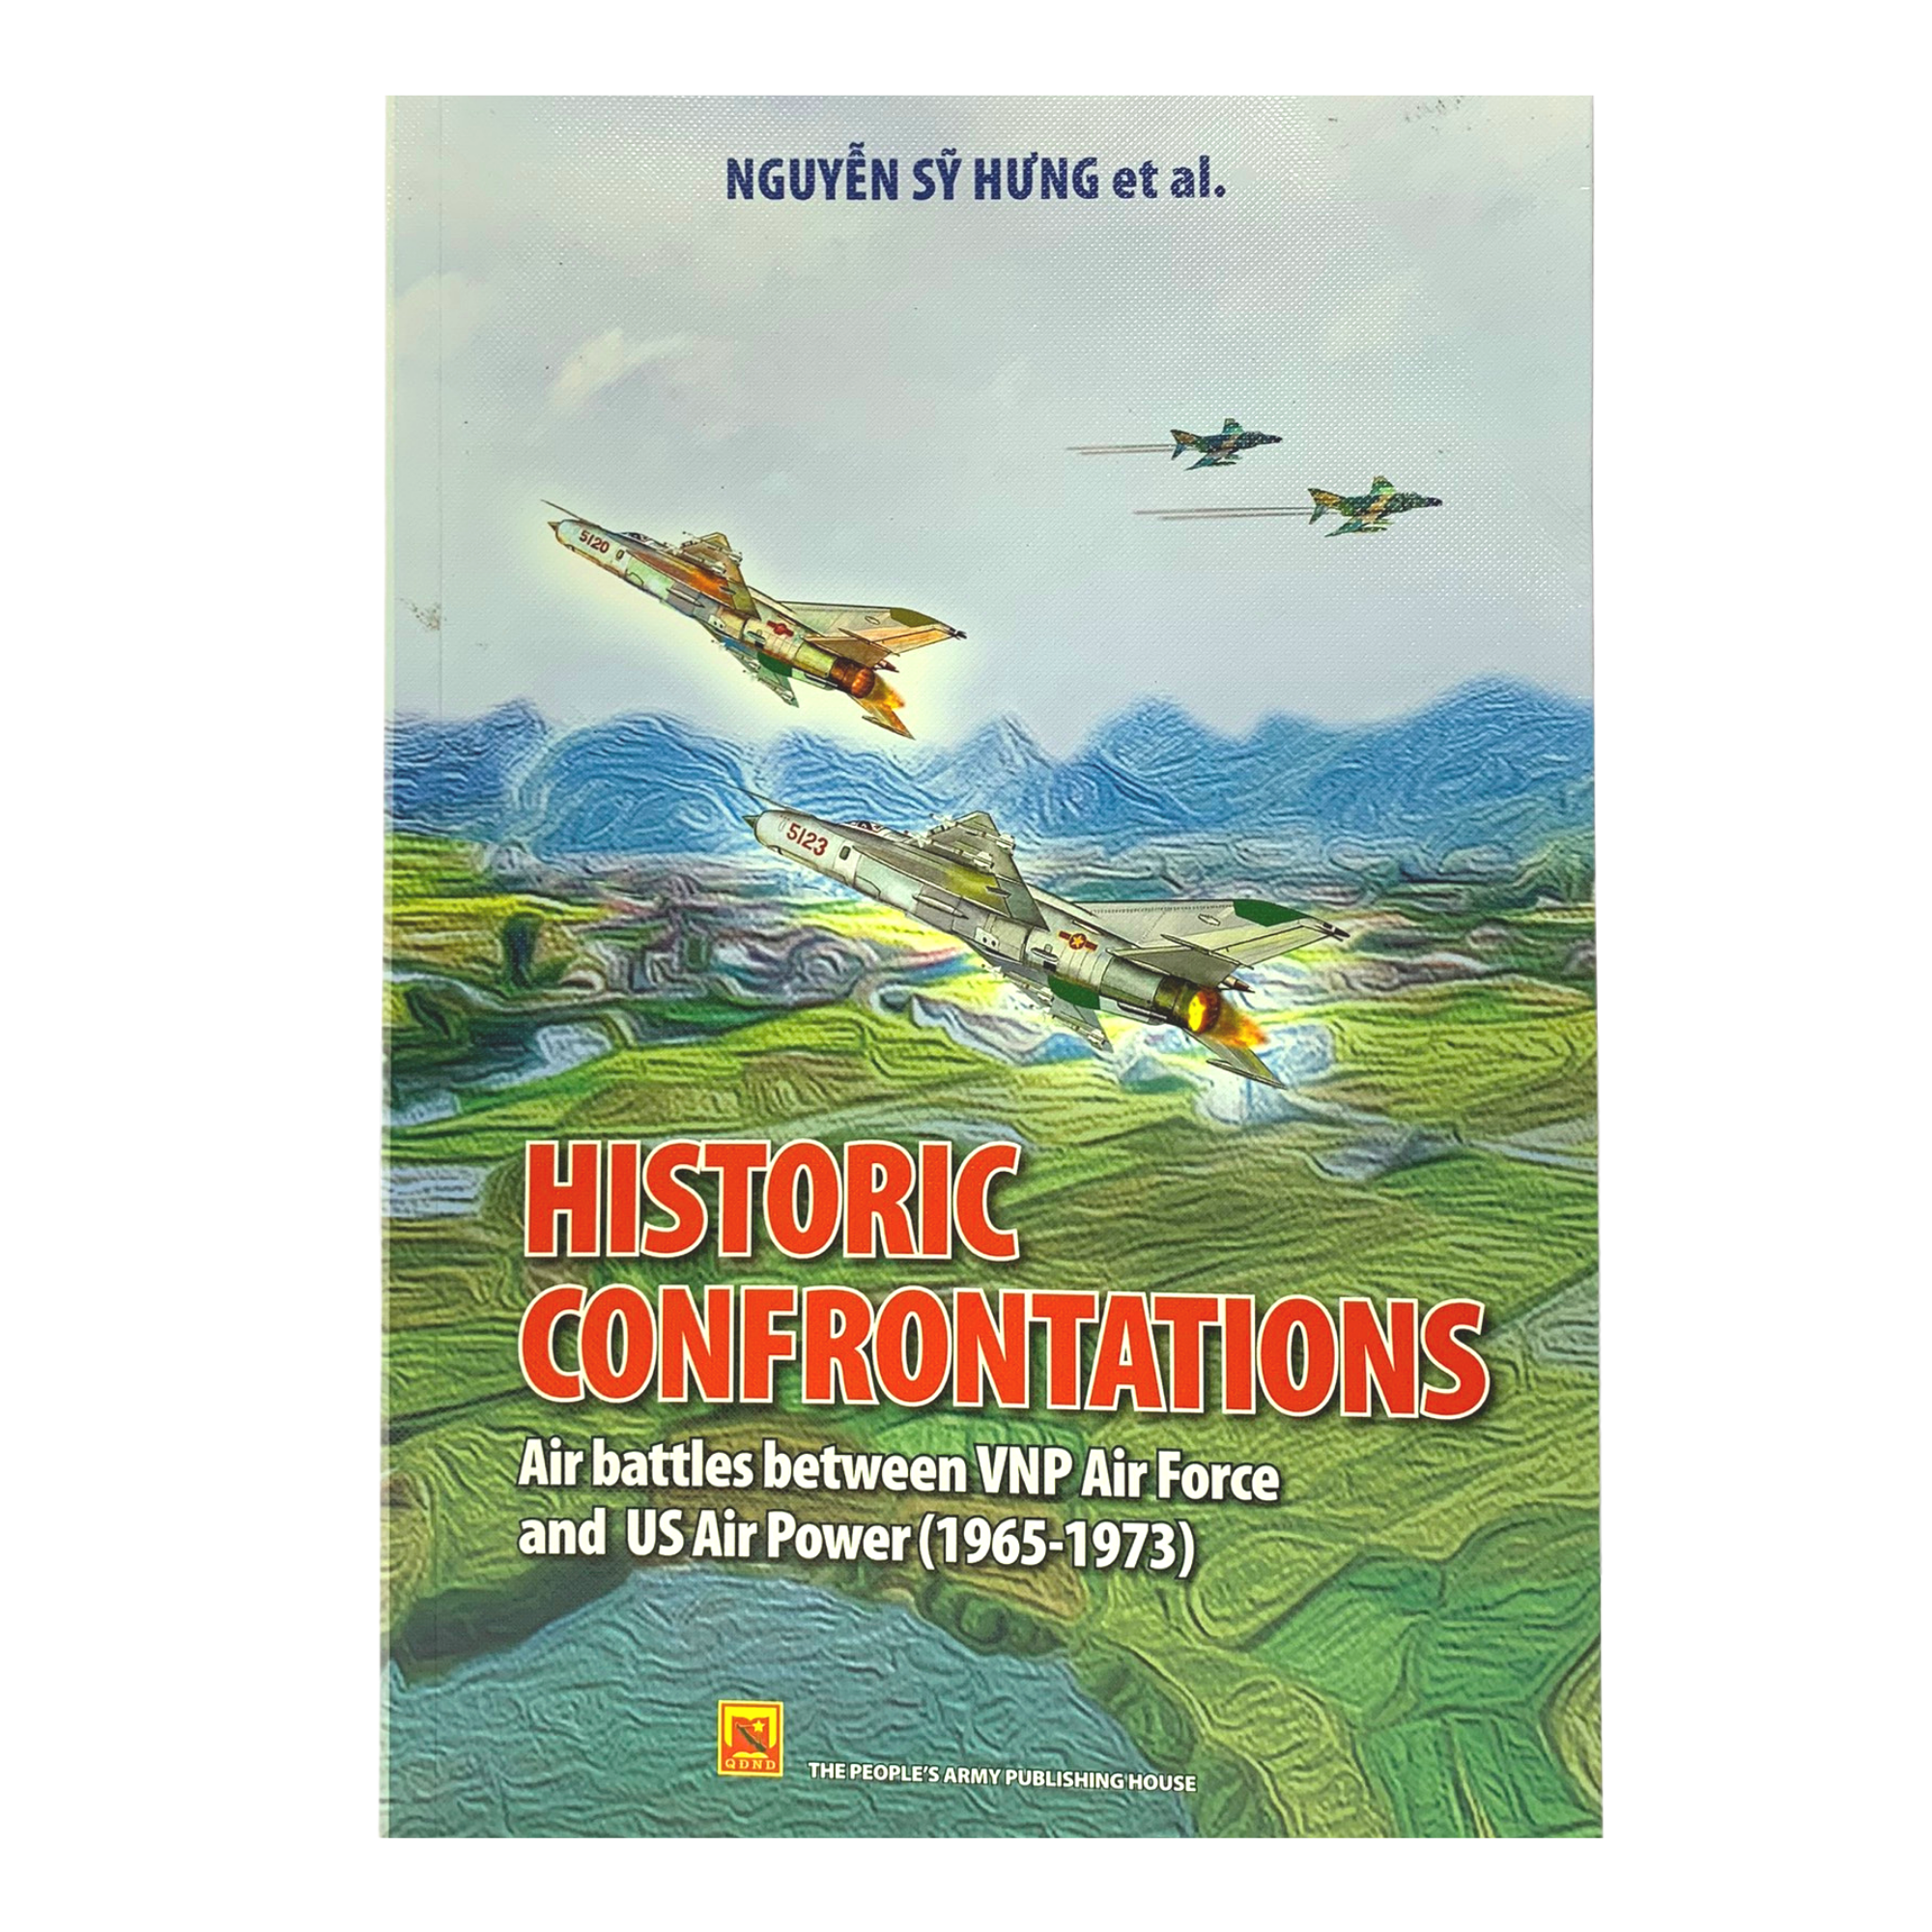 Historic Confrontations - Air battles between VNP Air Force and US Air Power (1965 - 1973)